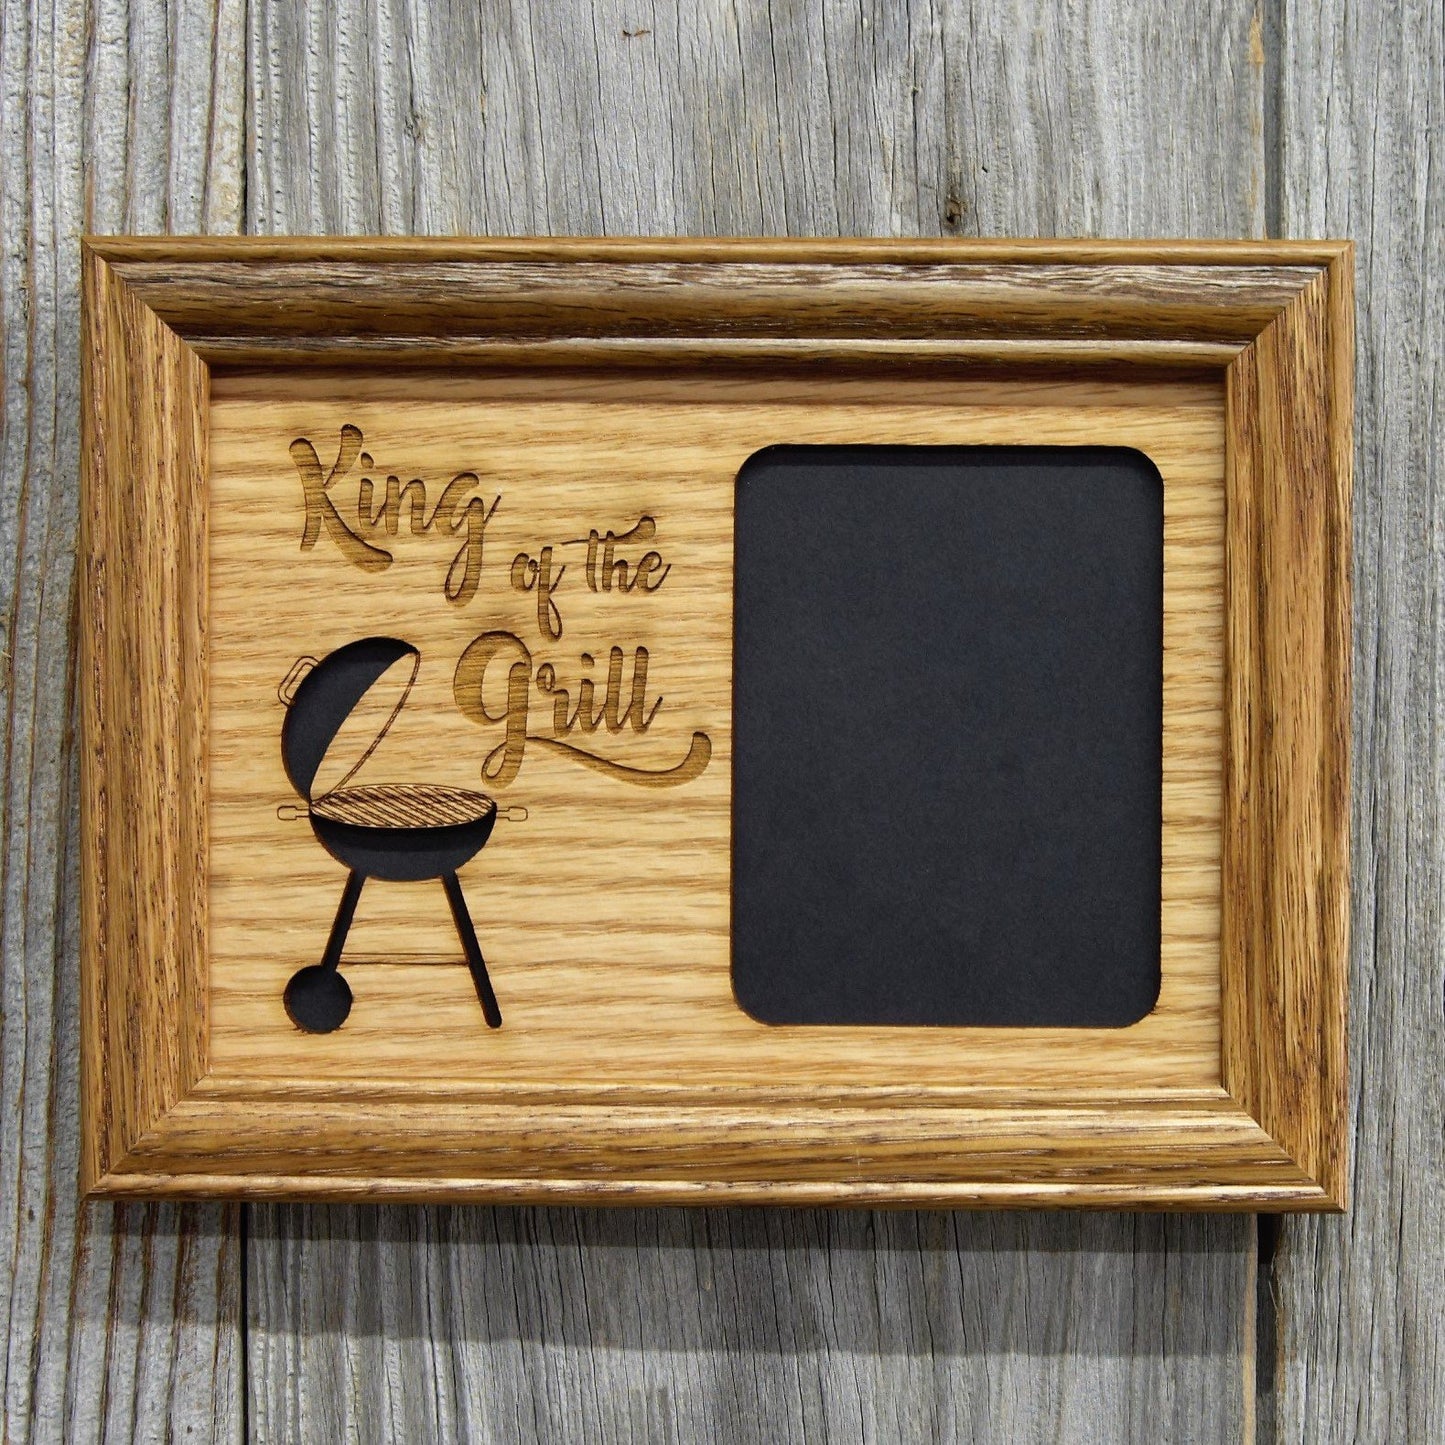 King of The Grill Picture Frame - 5x7 Frame Hold 3x4 Photo